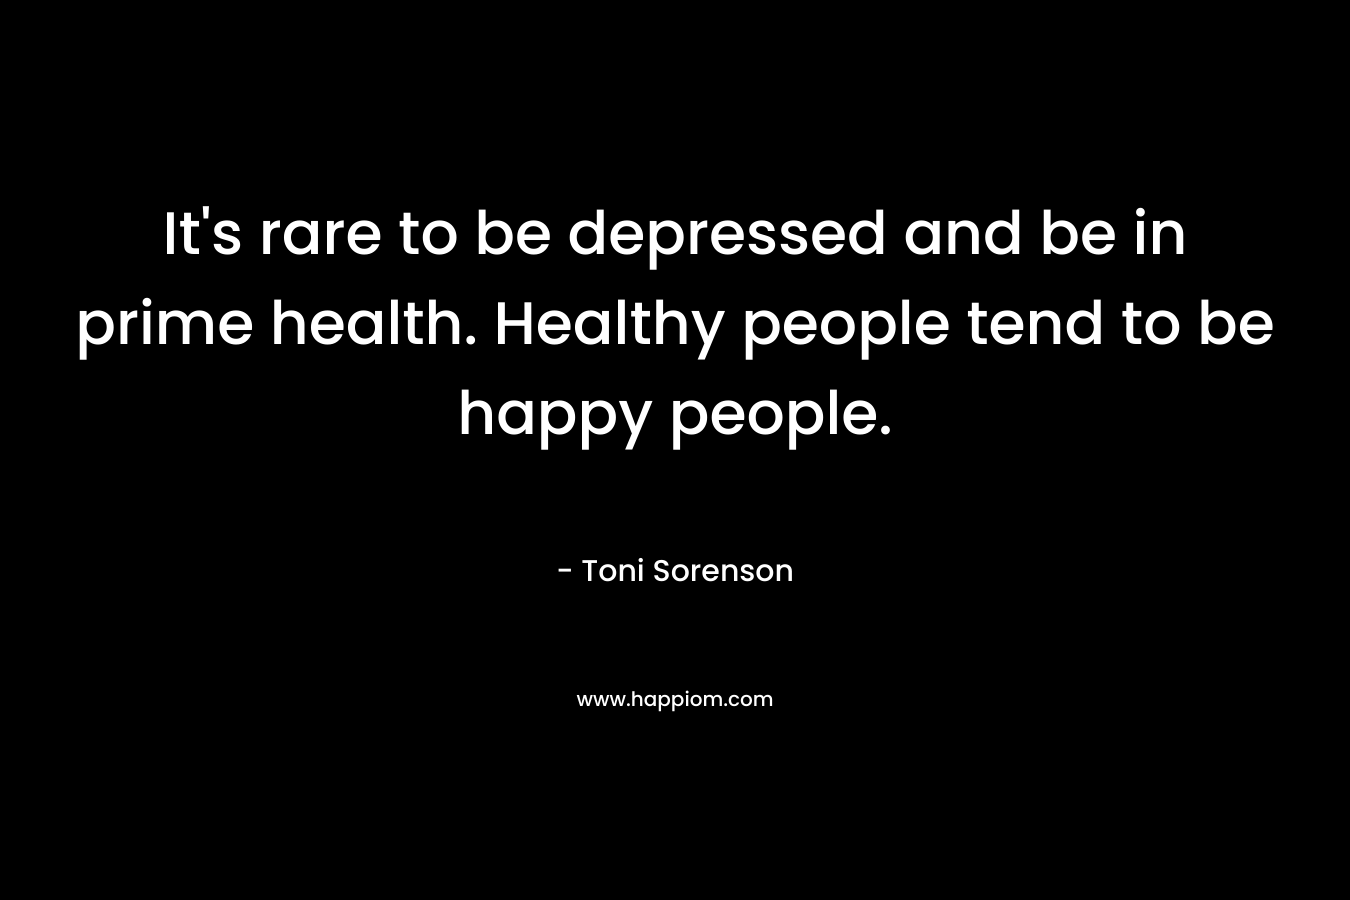 It's rare to be depressed and be in prime health. Healthy people tend to be happy people.